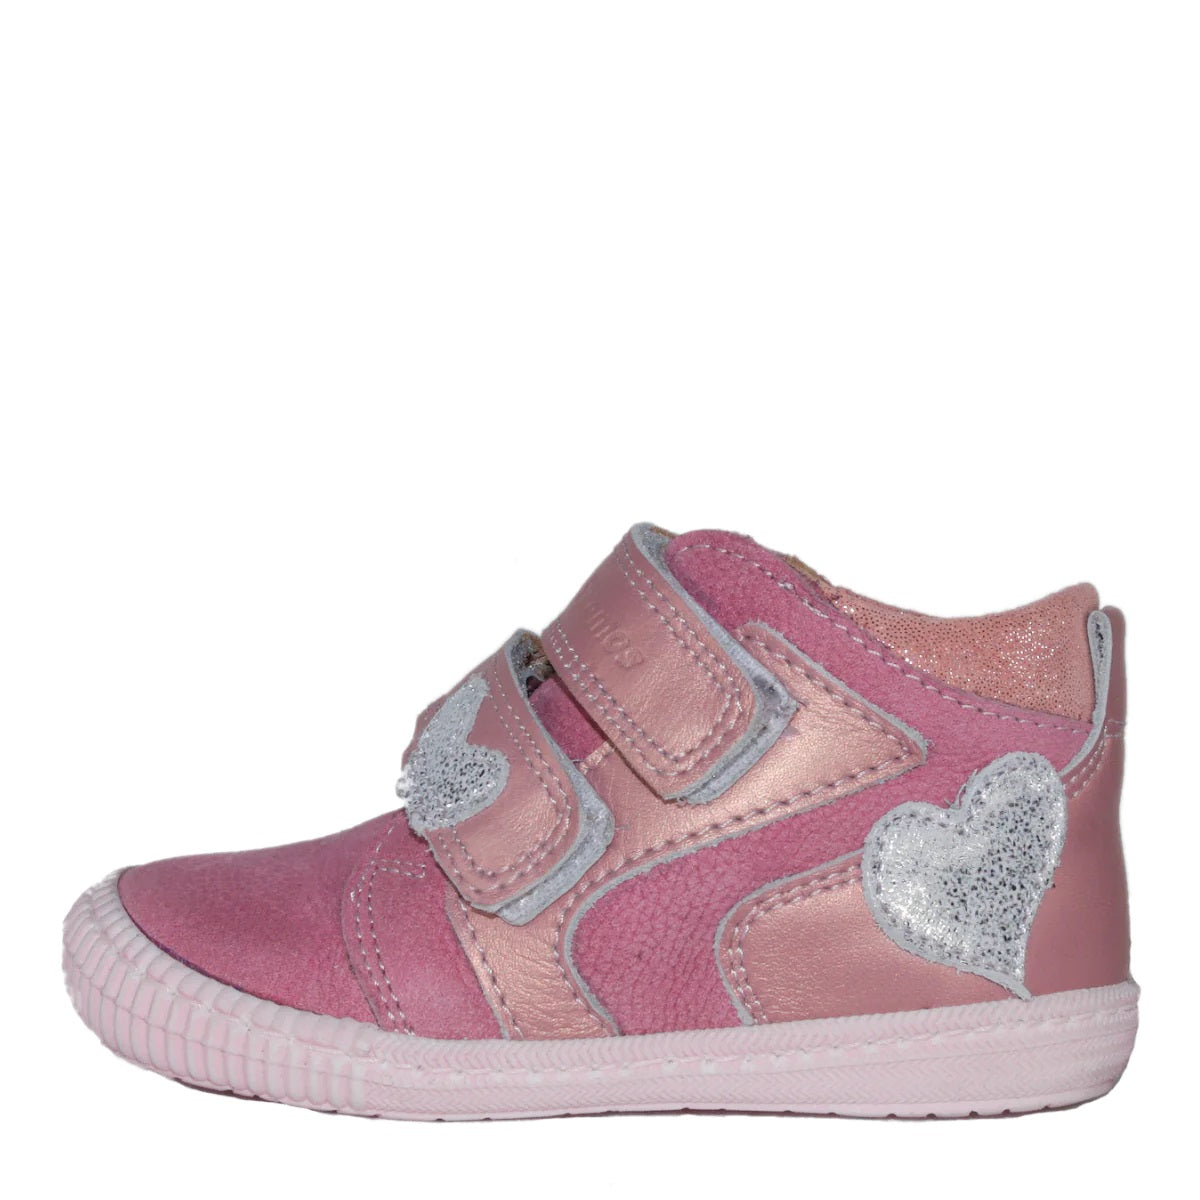 Szamos kid girl sneakers baby pink with silver heart decor toddler/little kid/big kid size